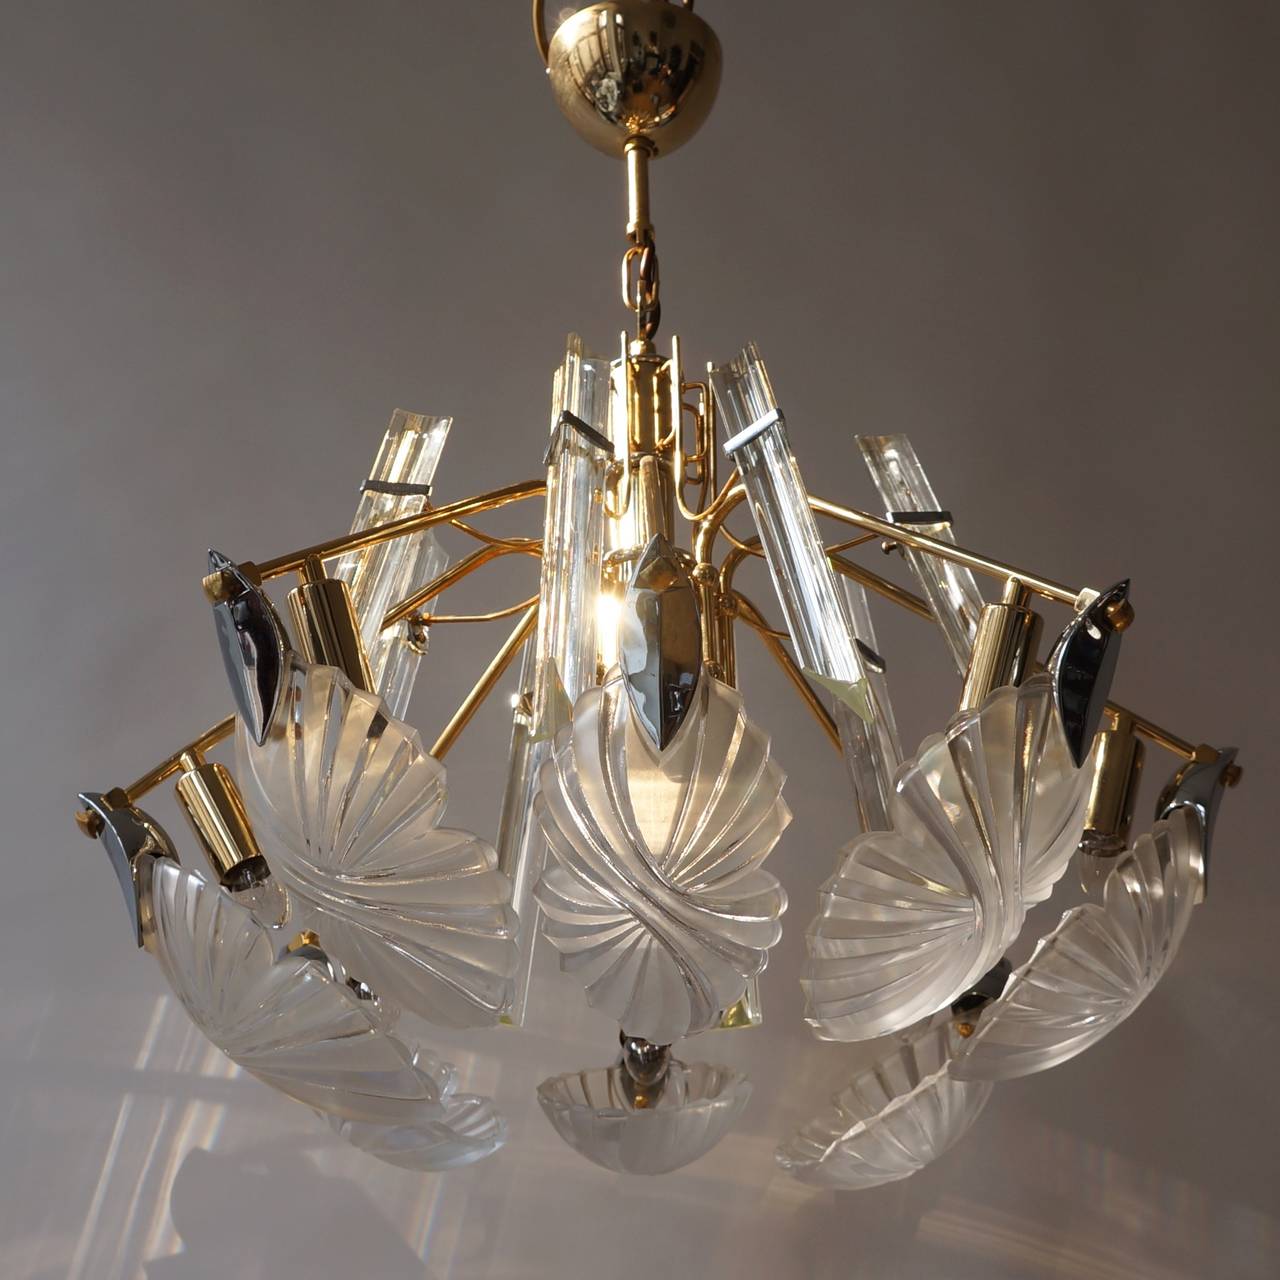 Bakalowits gold-plated crystal chandelier.
Very exclusive and high quality chandelier by Bakalowits & Sohne from the 1960s. It is made of hand-cut crystals and a gold-plated frame. Excellent condition with very little patina on top of the